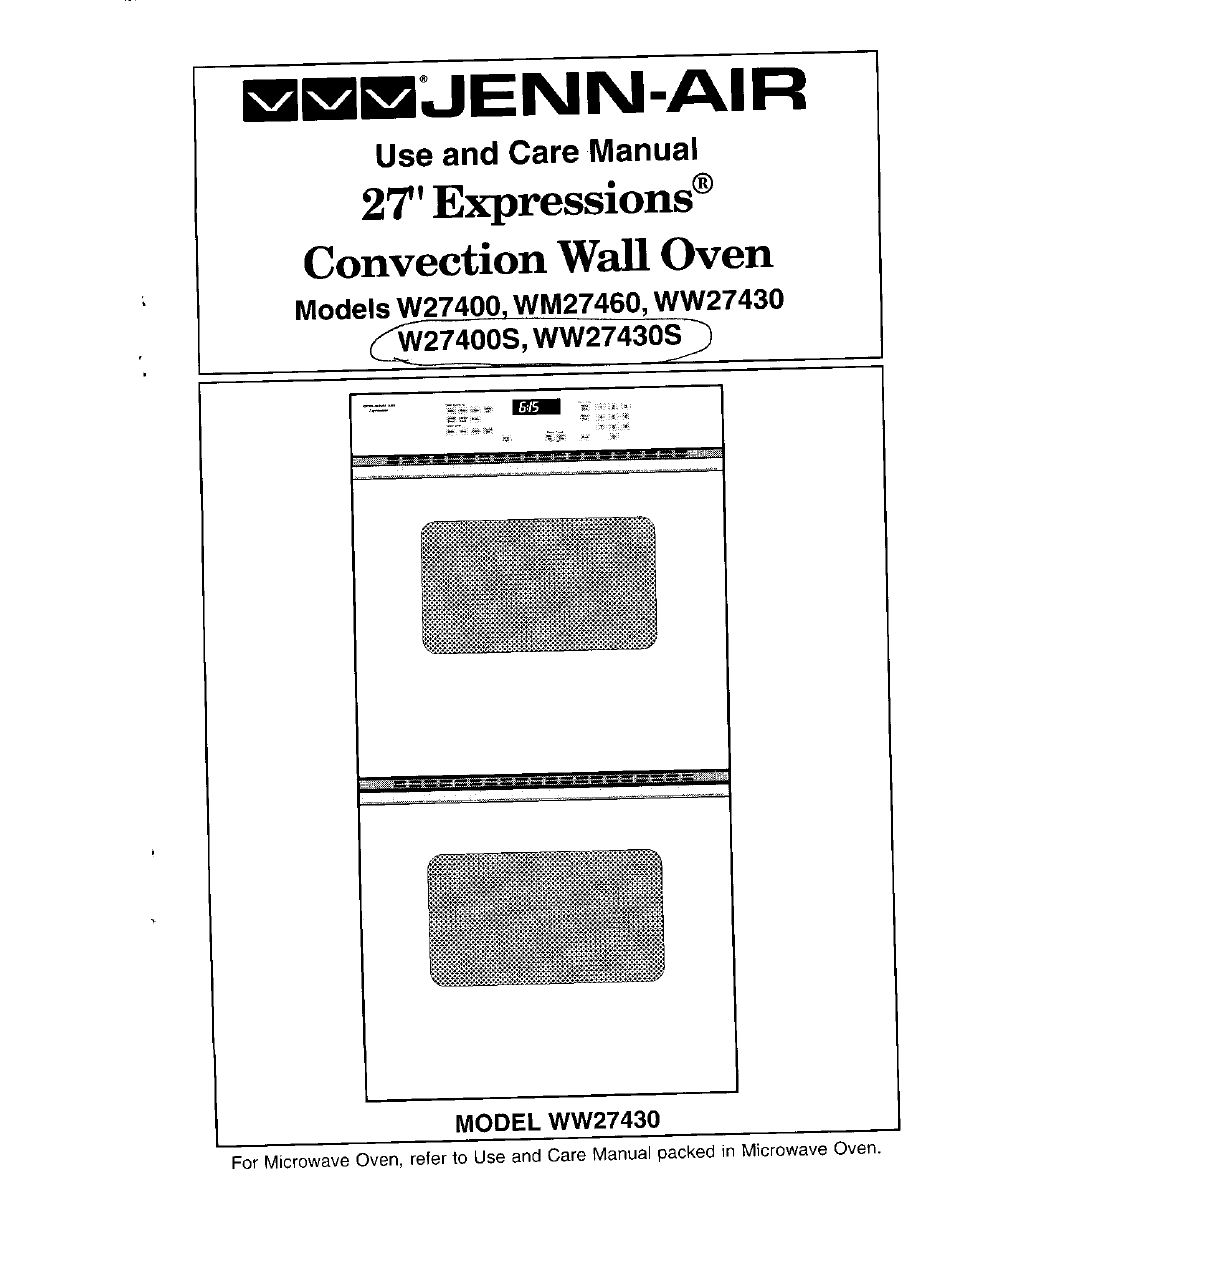 Jenn-air electric wall oven service manual